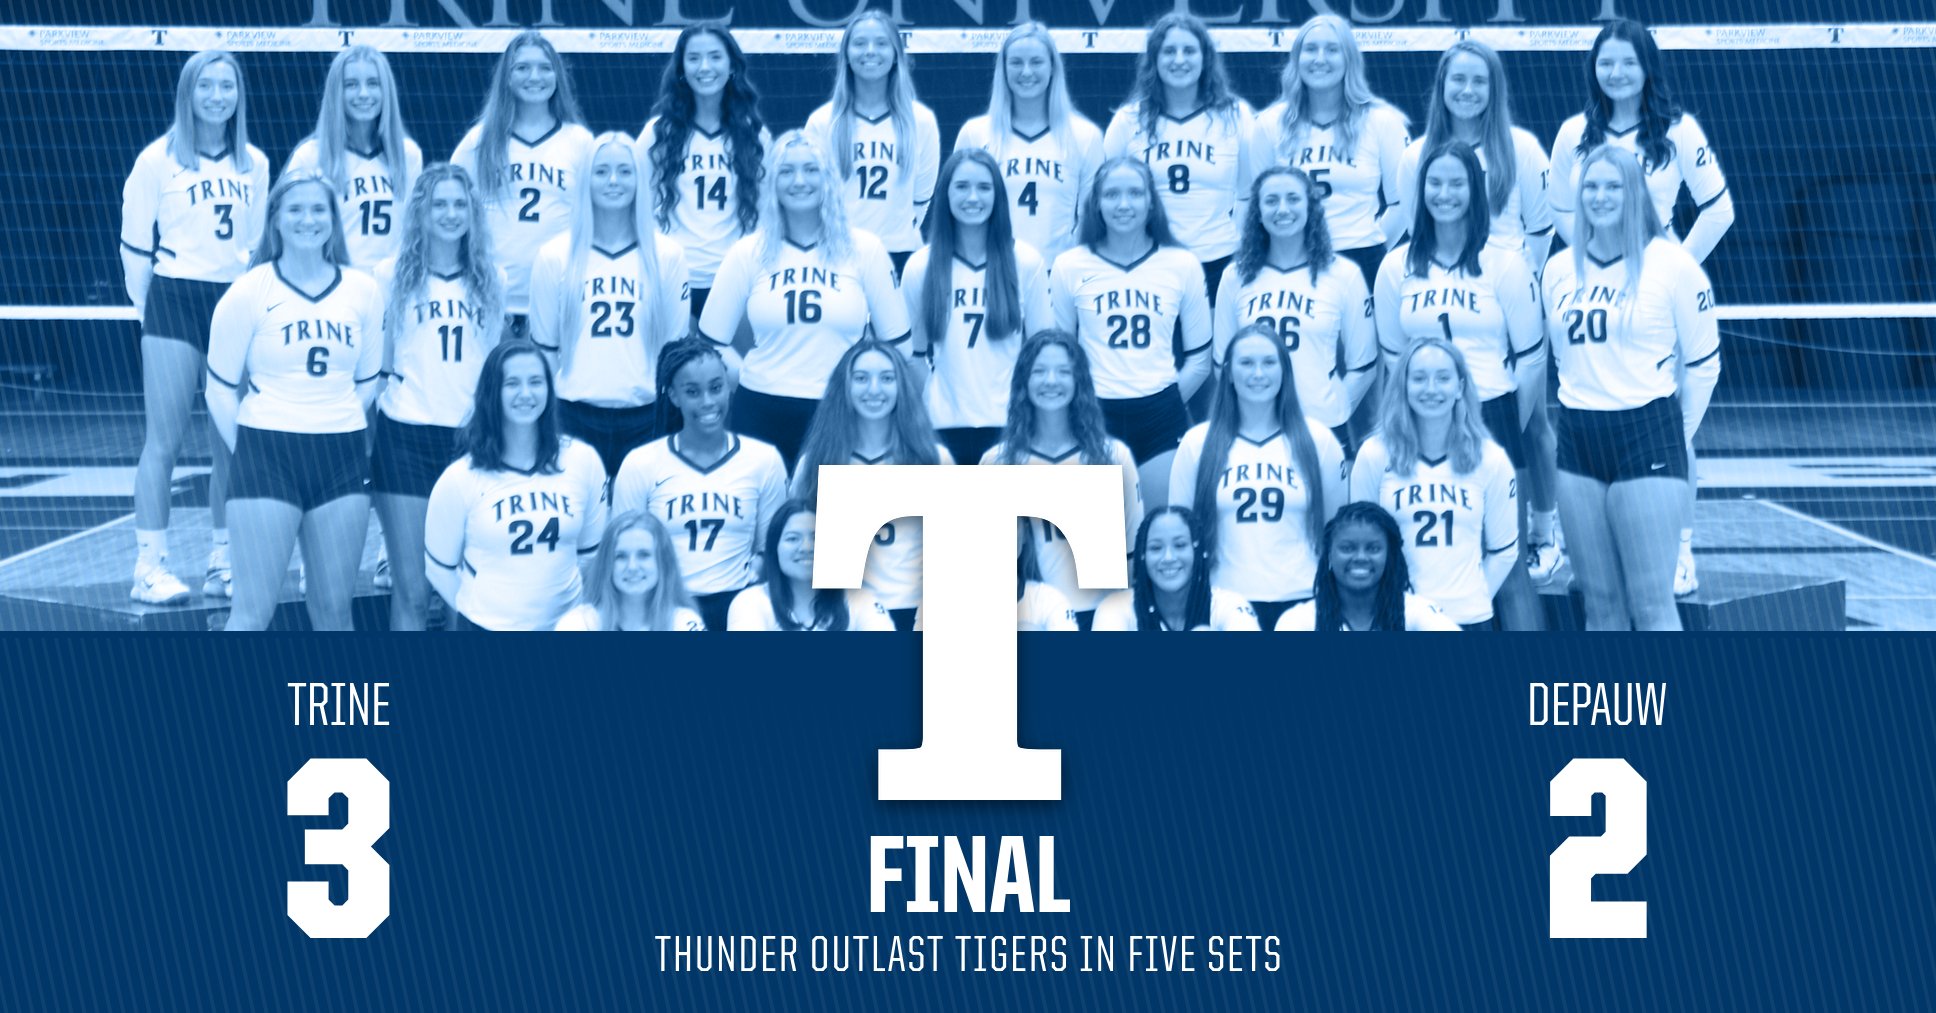 Thunder Outlast Tigers in Five Sets